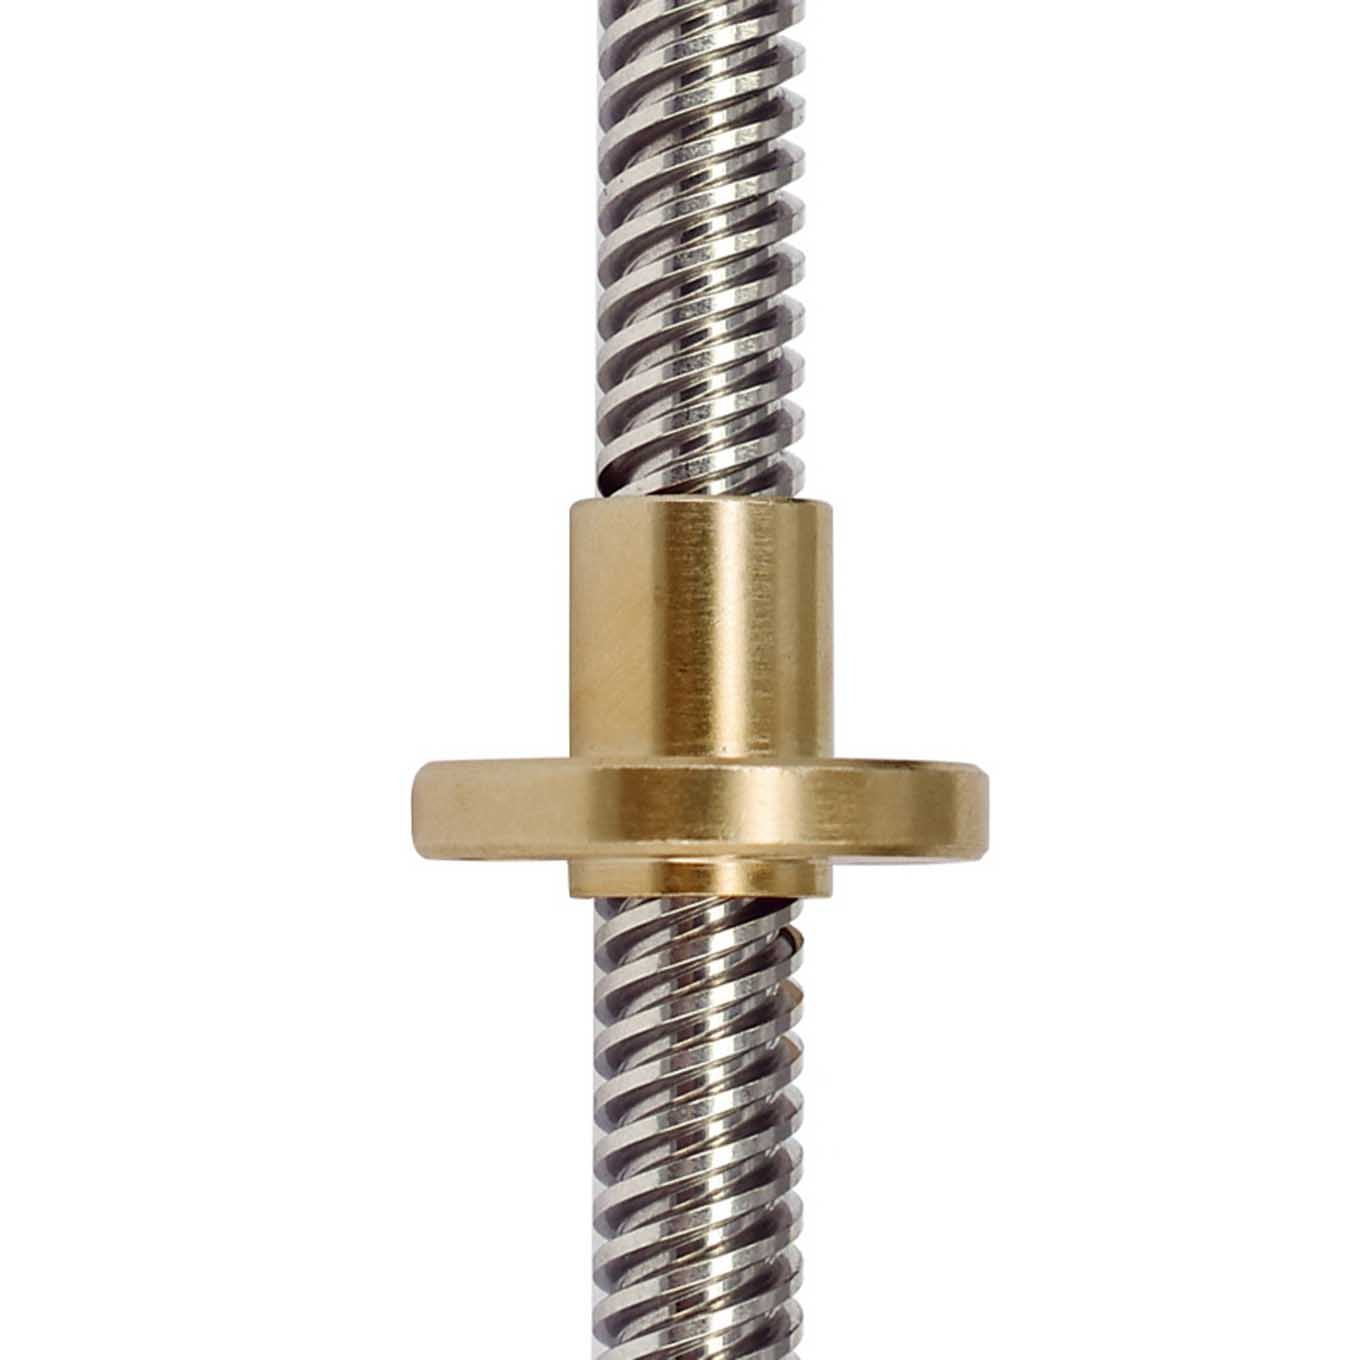 Lead Screw T8 1000mm Stainless Steel with Brass Nut